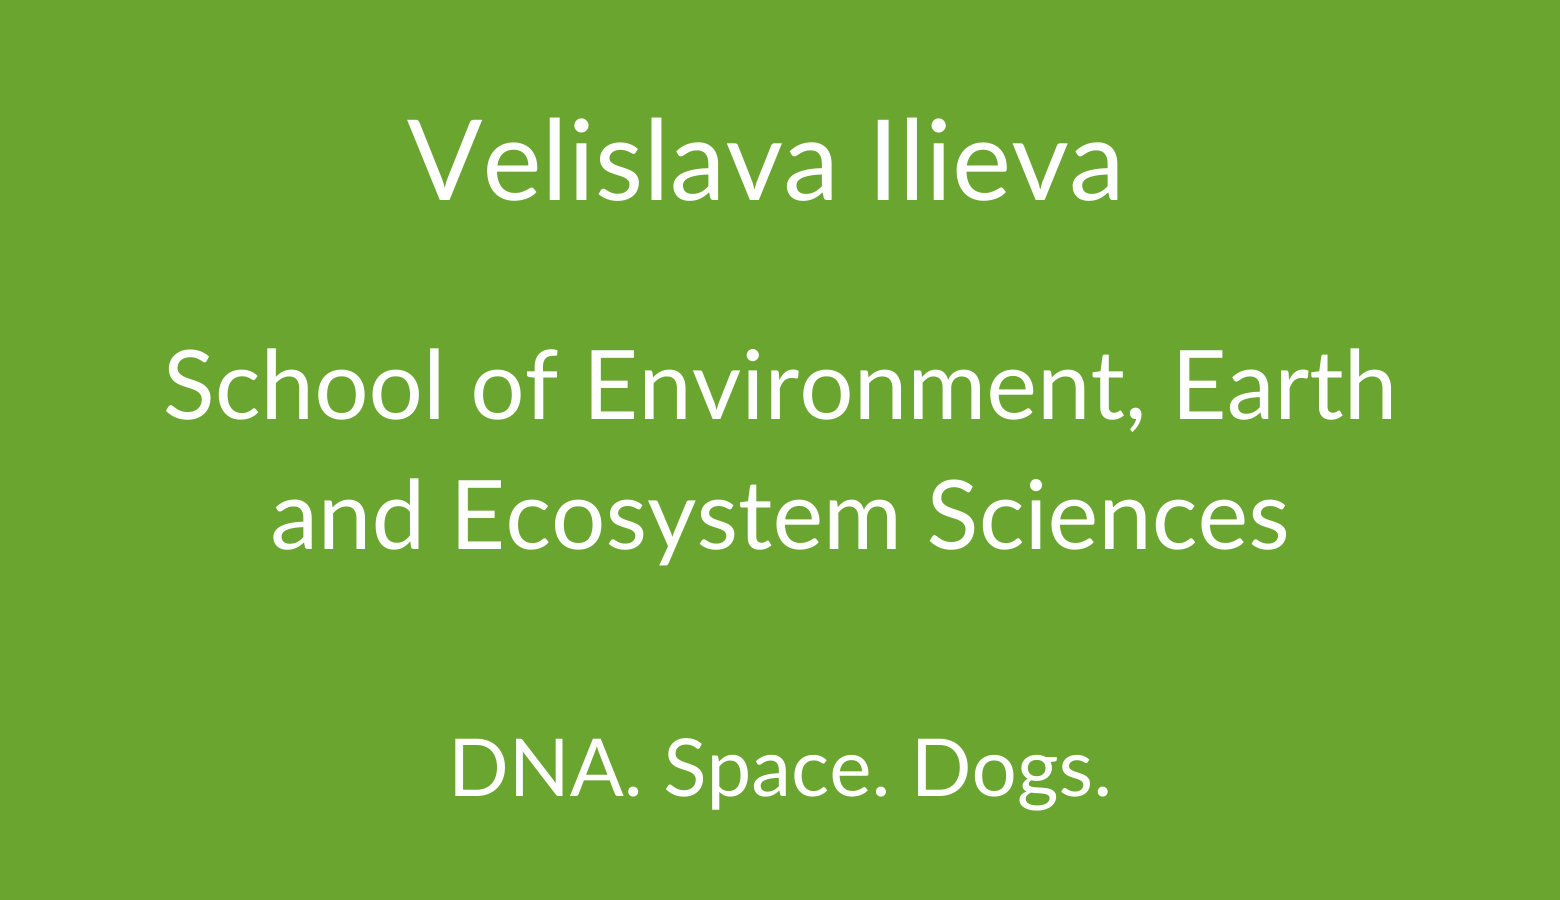 Velislava Ilieva. School of Environment, Earth and Ecosystem Sciences . DNA. Space. Dogs.